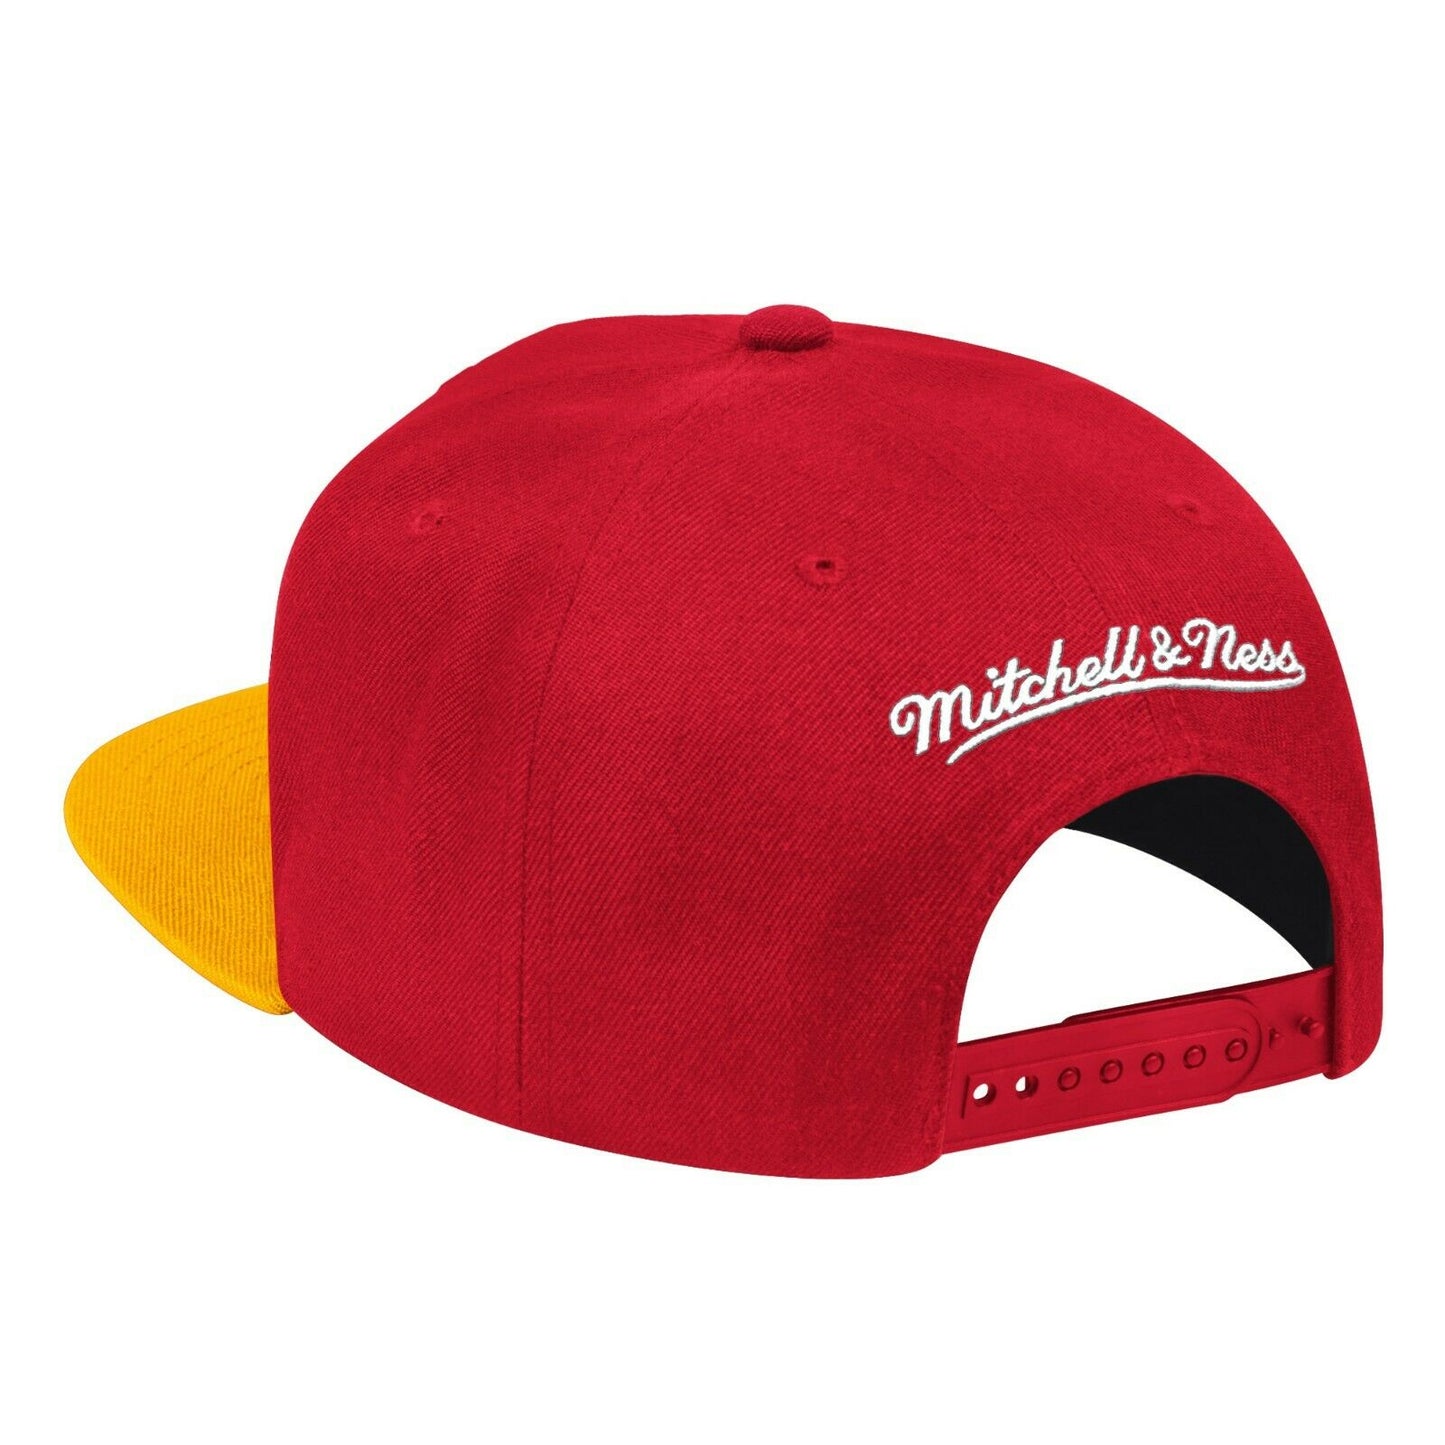 Houston Rockets 1994 NBA Finals Side Patch 2 Tone Red/ Yellow Mitchell & Ness Snapback Hat